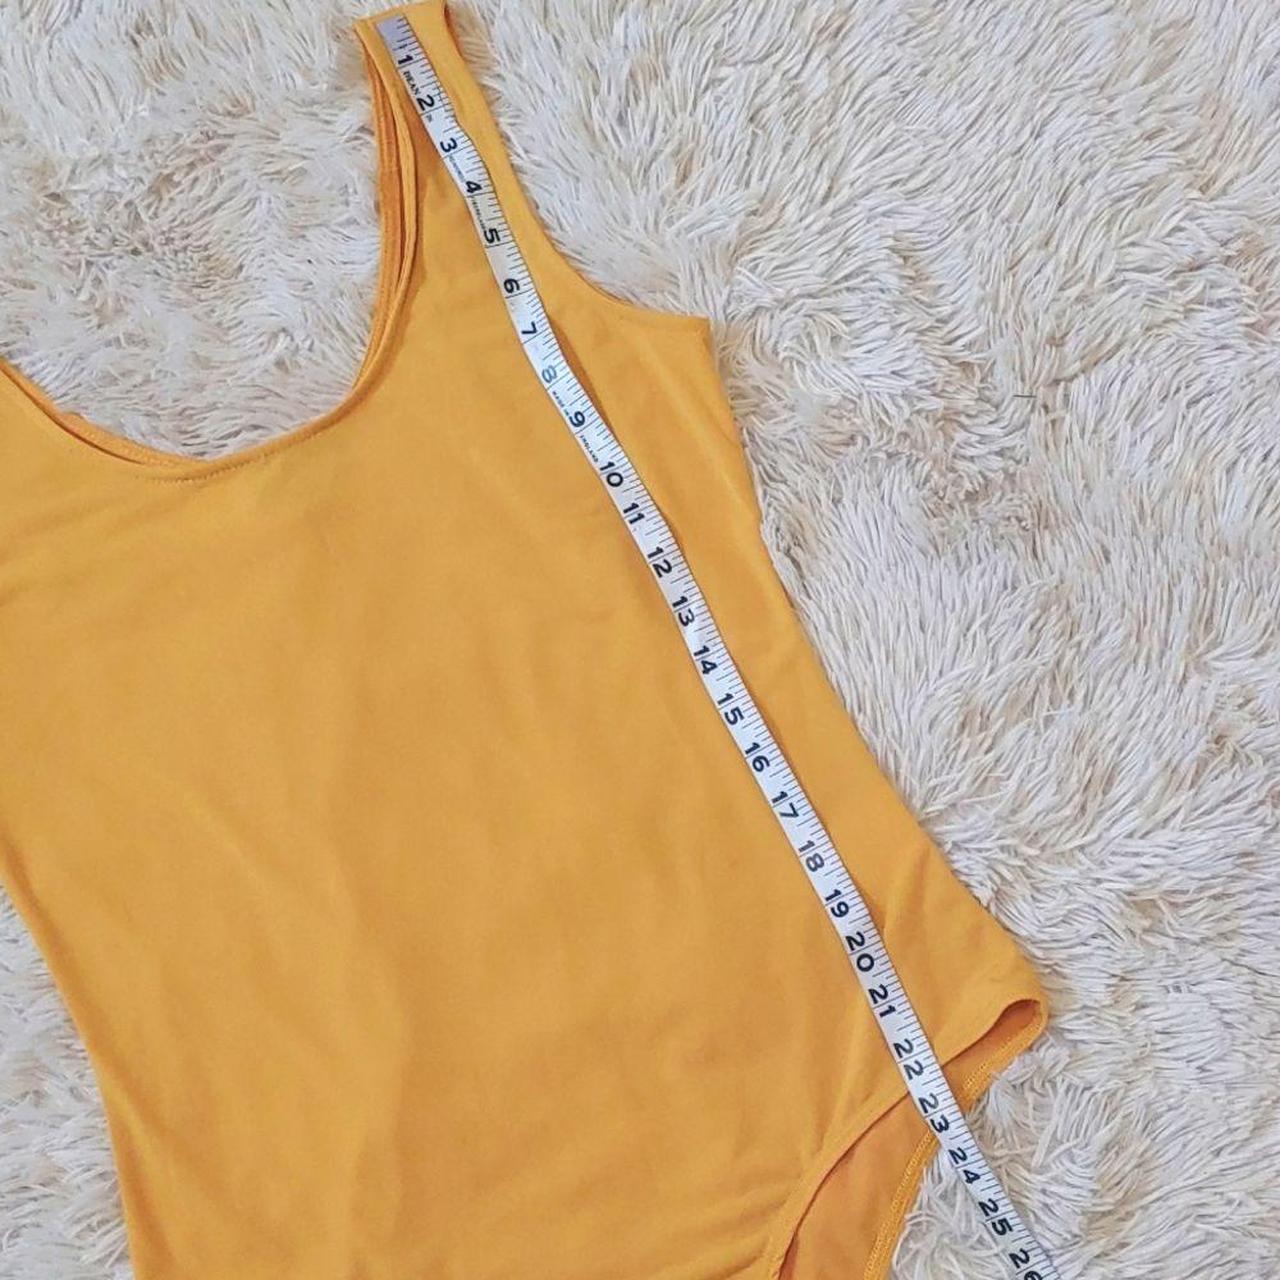 Product Image 2 - Modcloth bodysuit!

Mustard yellow.

Scoop neck front